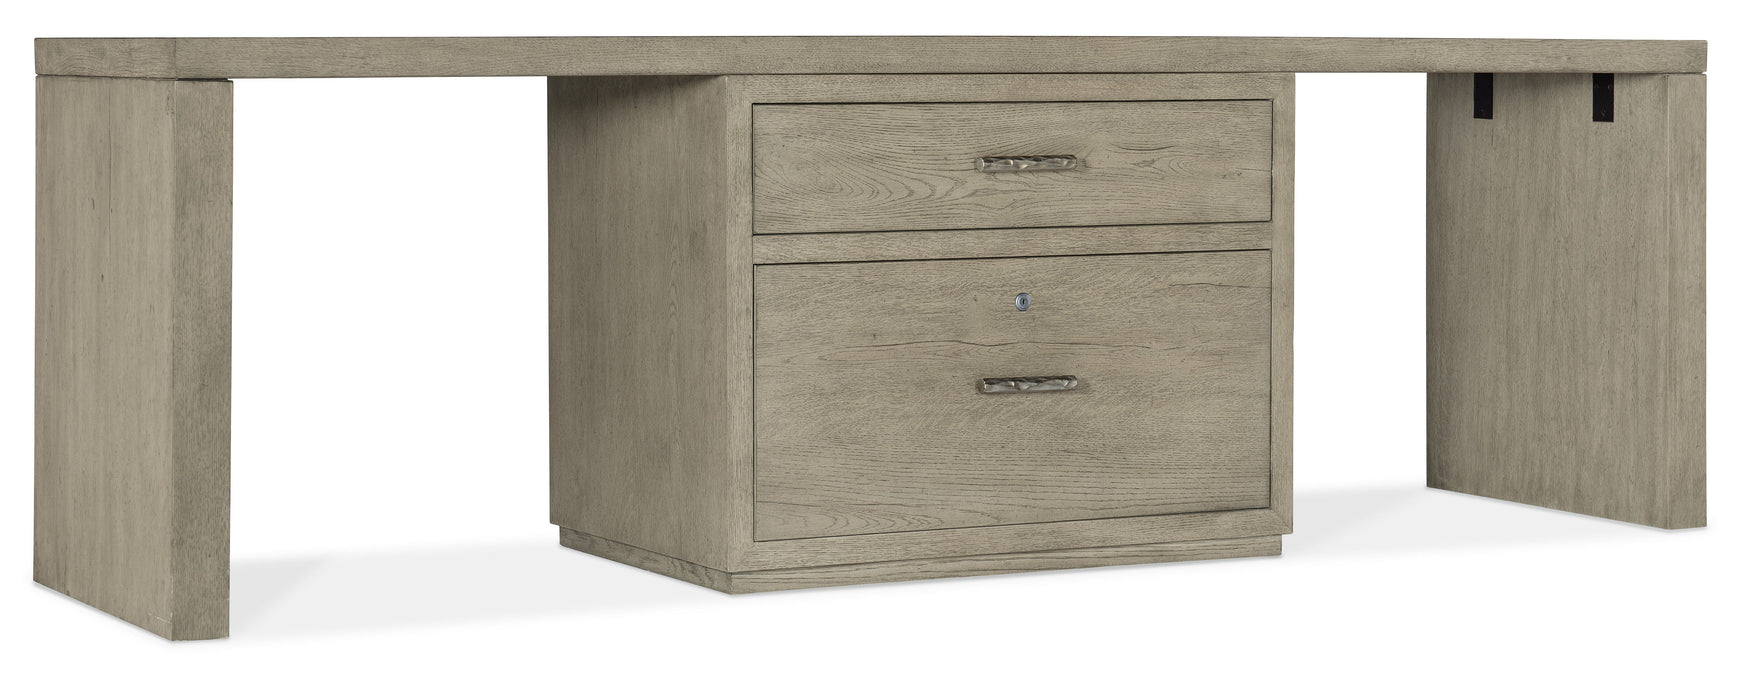 Linville Falls Desk 96" Top Lateral File And 2 Legs